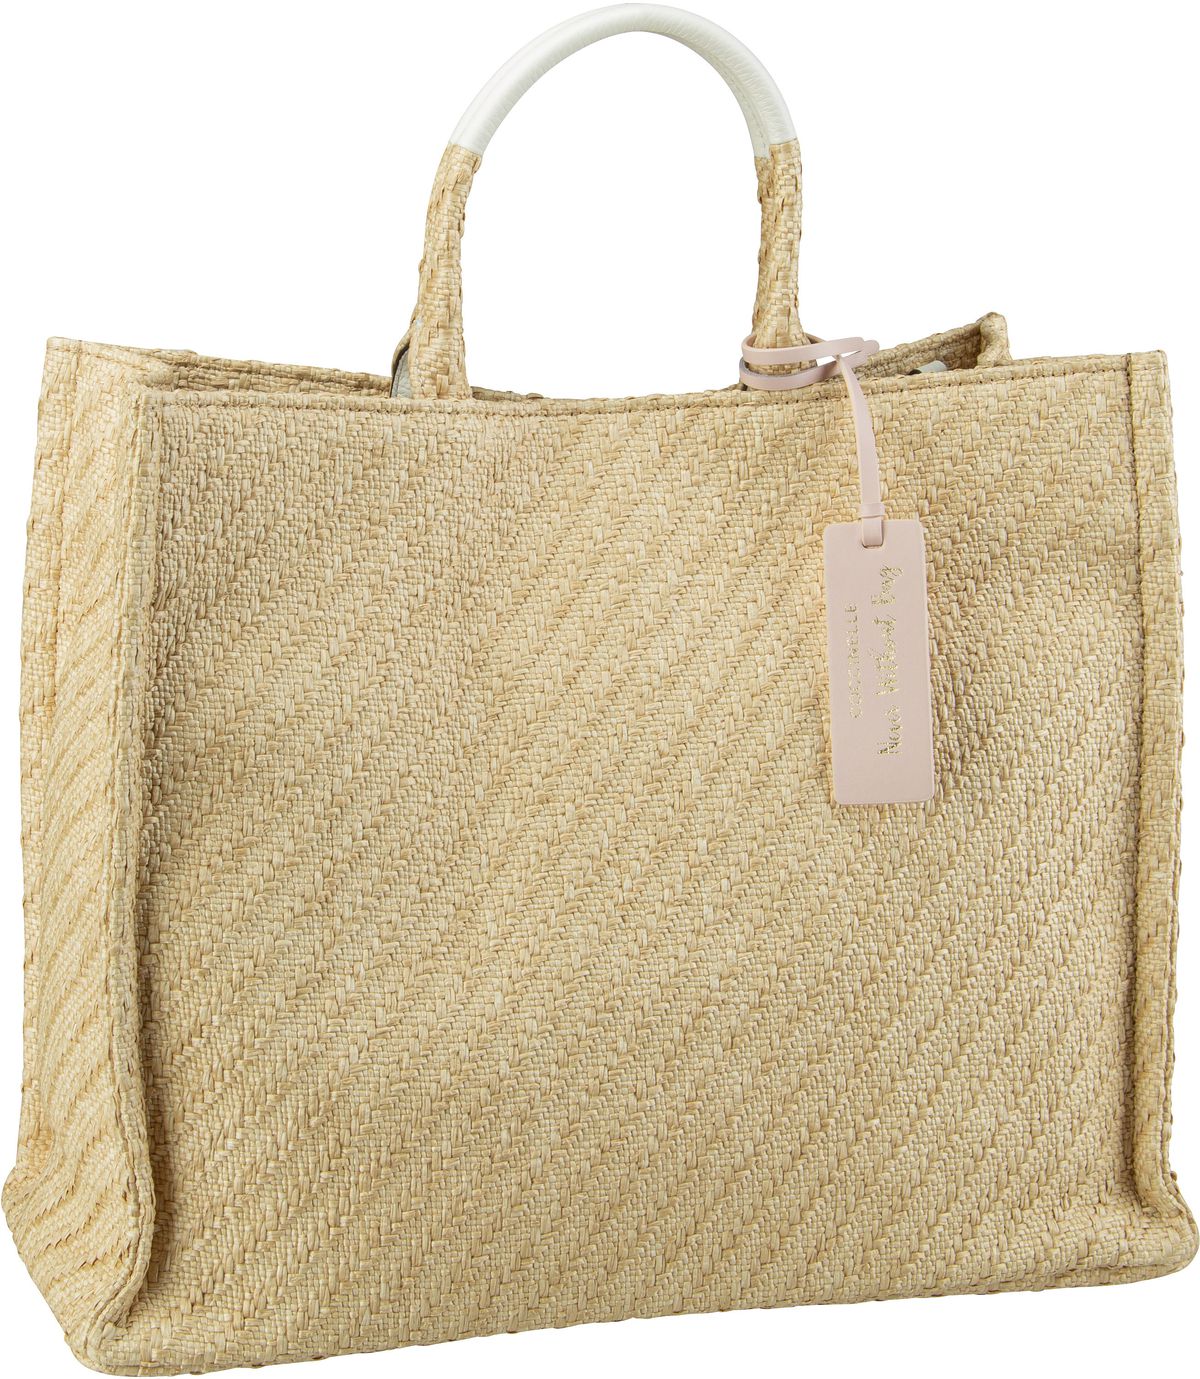 Coccinelle Never Without Bag Rafia 1801 - Natural/White